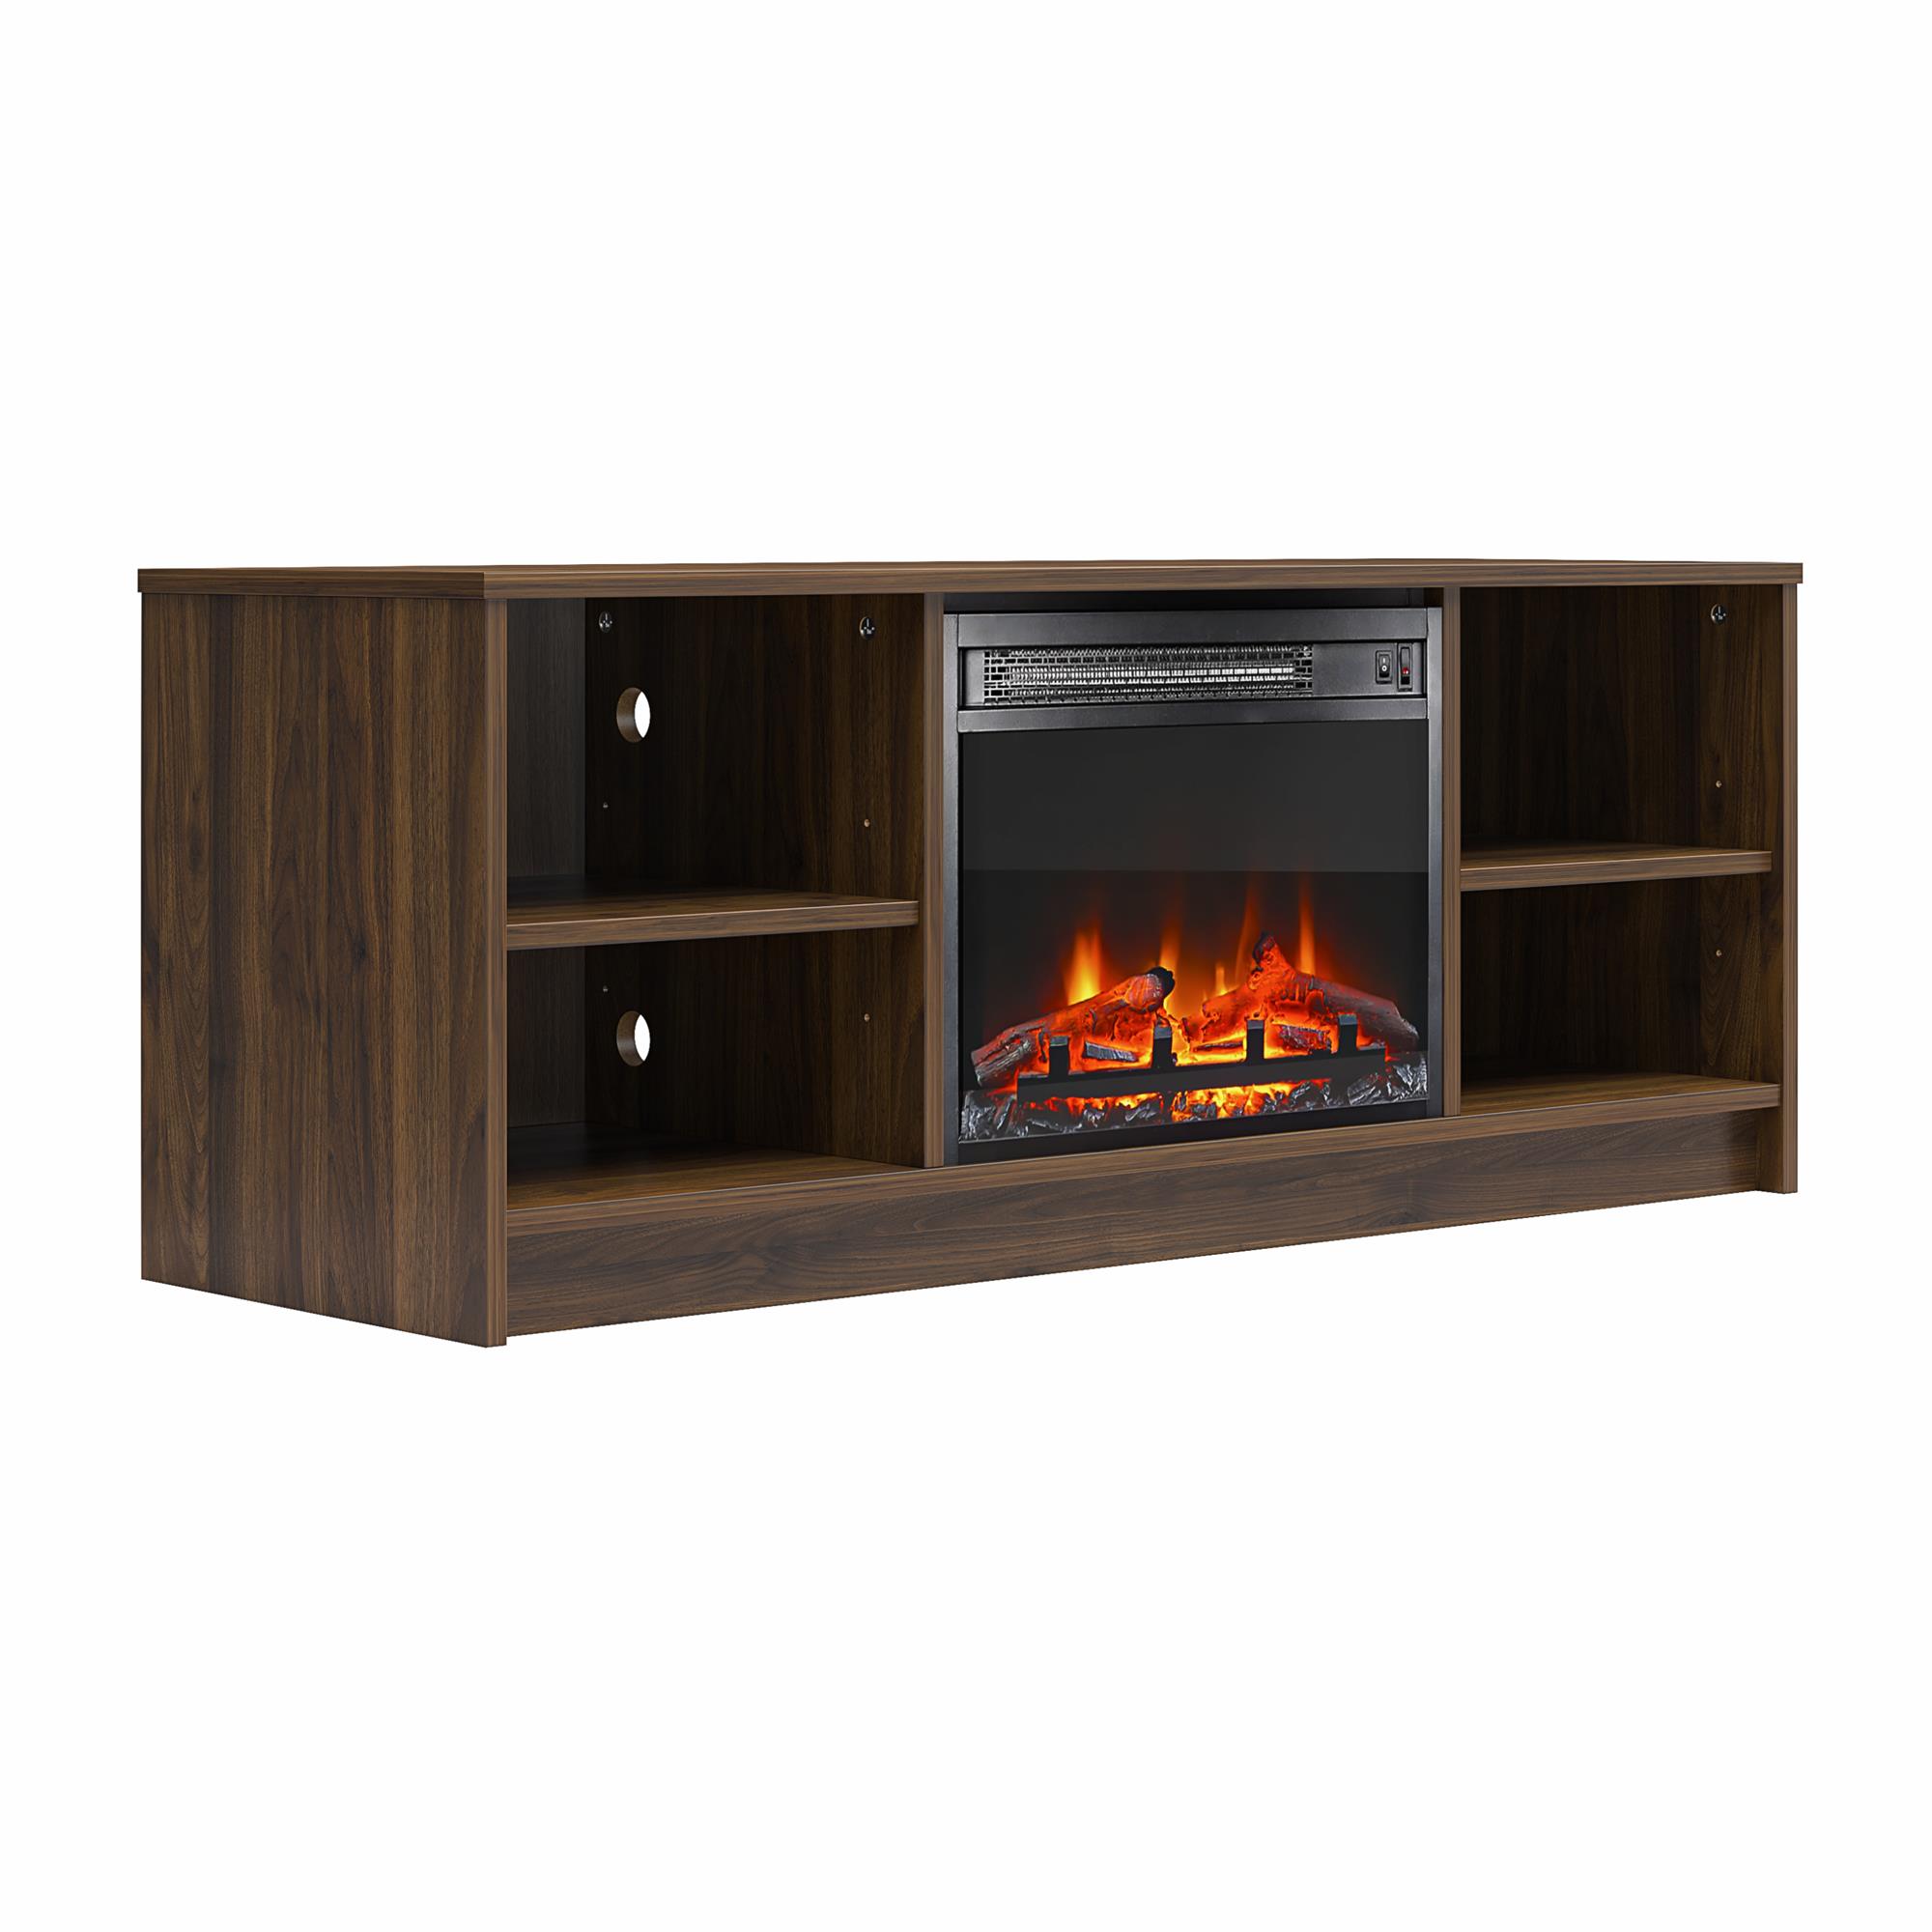 Mainstays Fireplace TV Stand, for TVs up to 55", Walnut - image 3 of 12